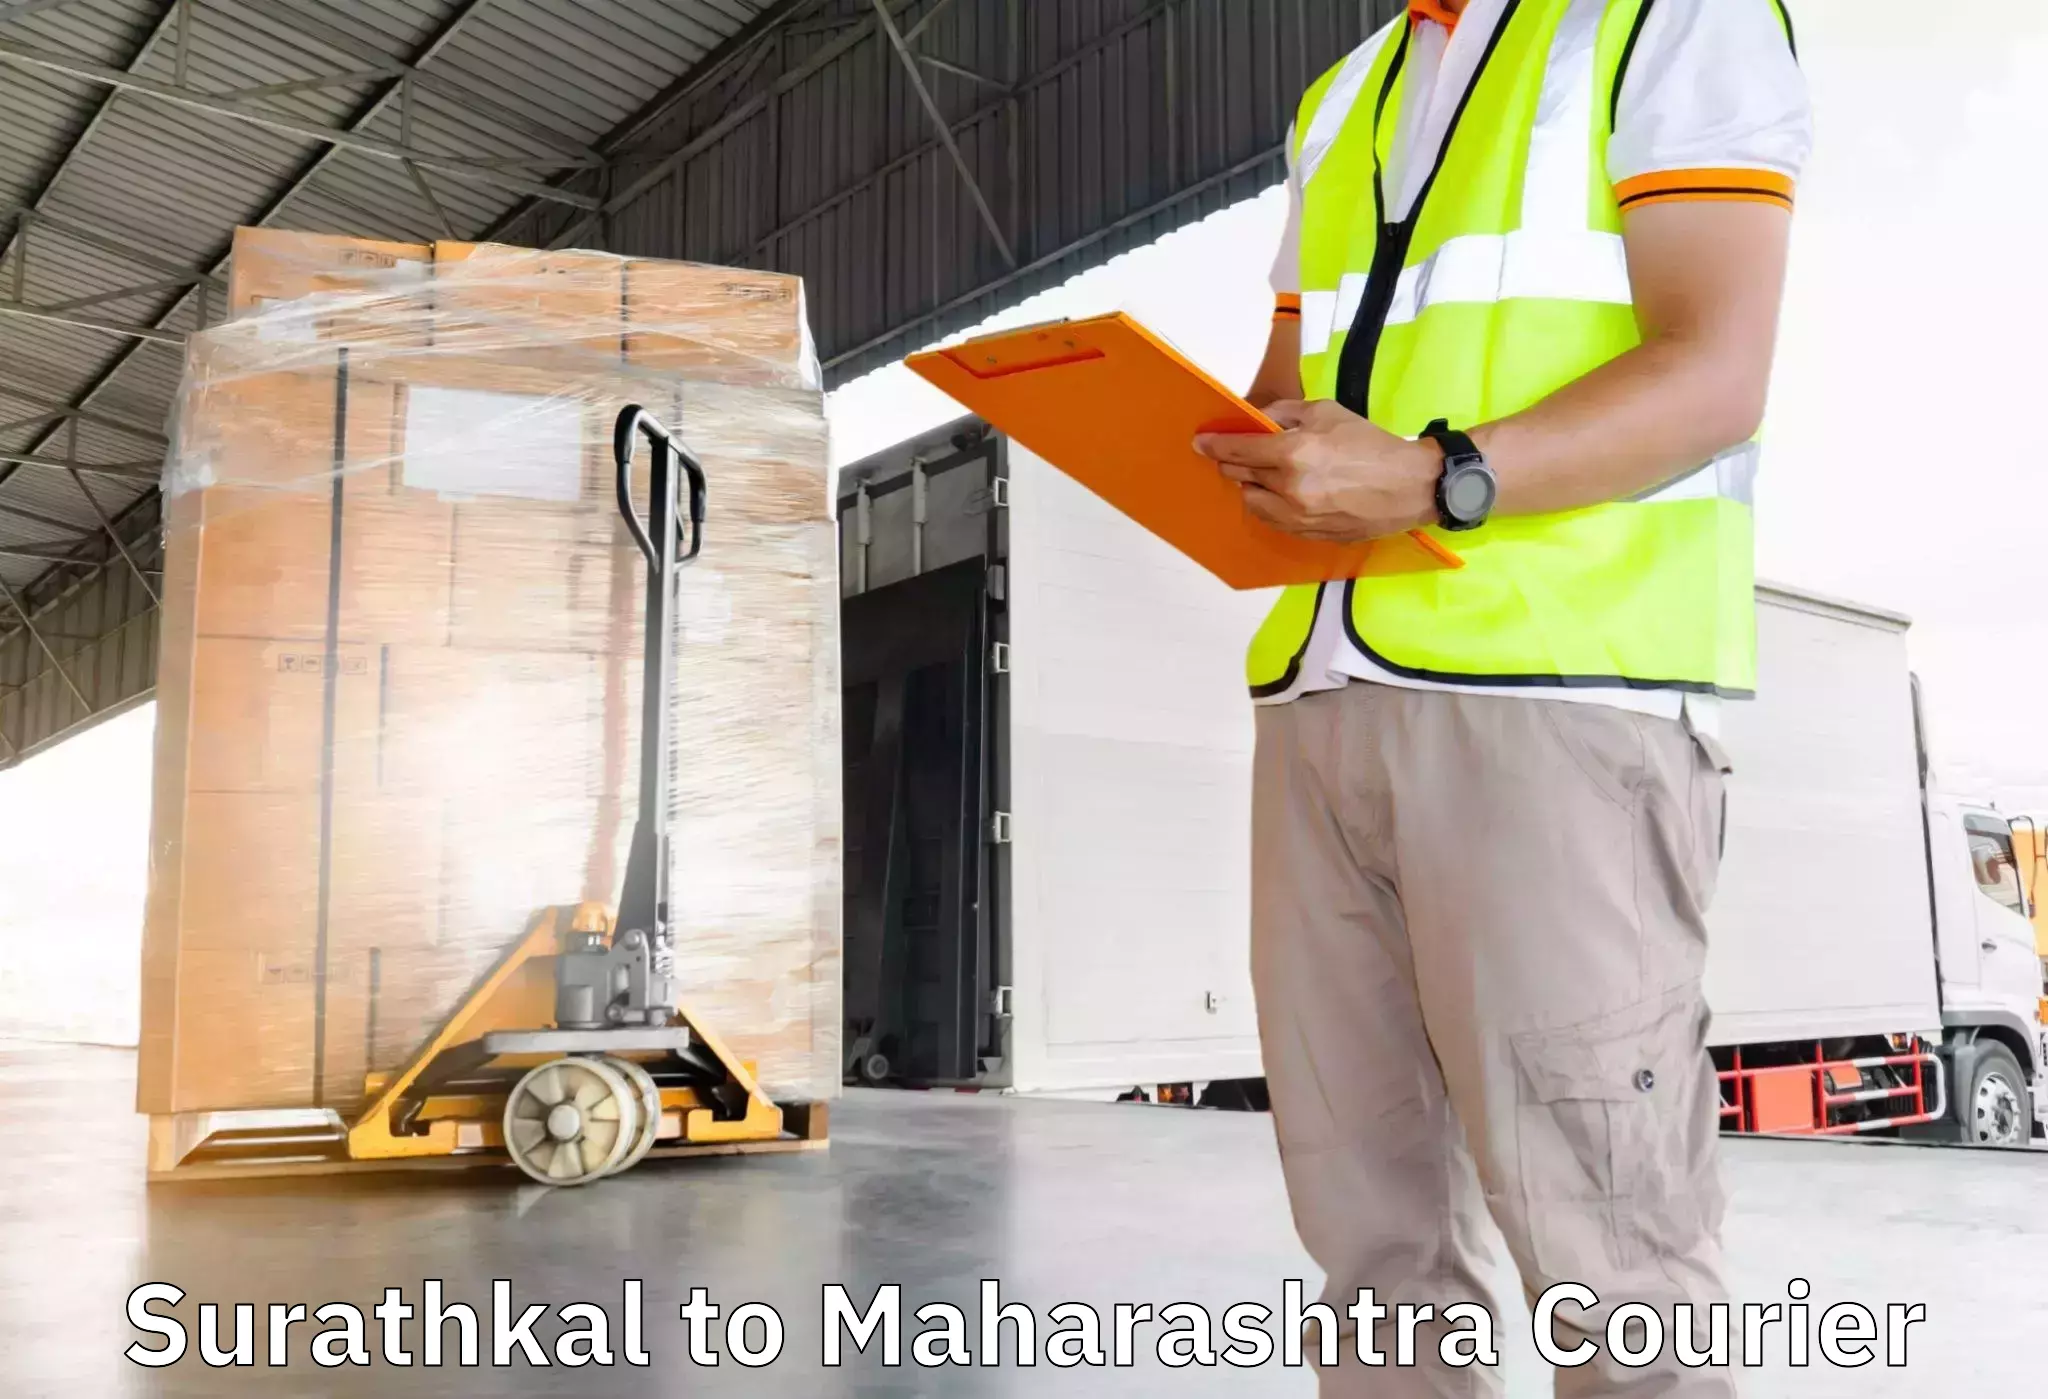 Quality relocation assistance in Surathkal to Mahad